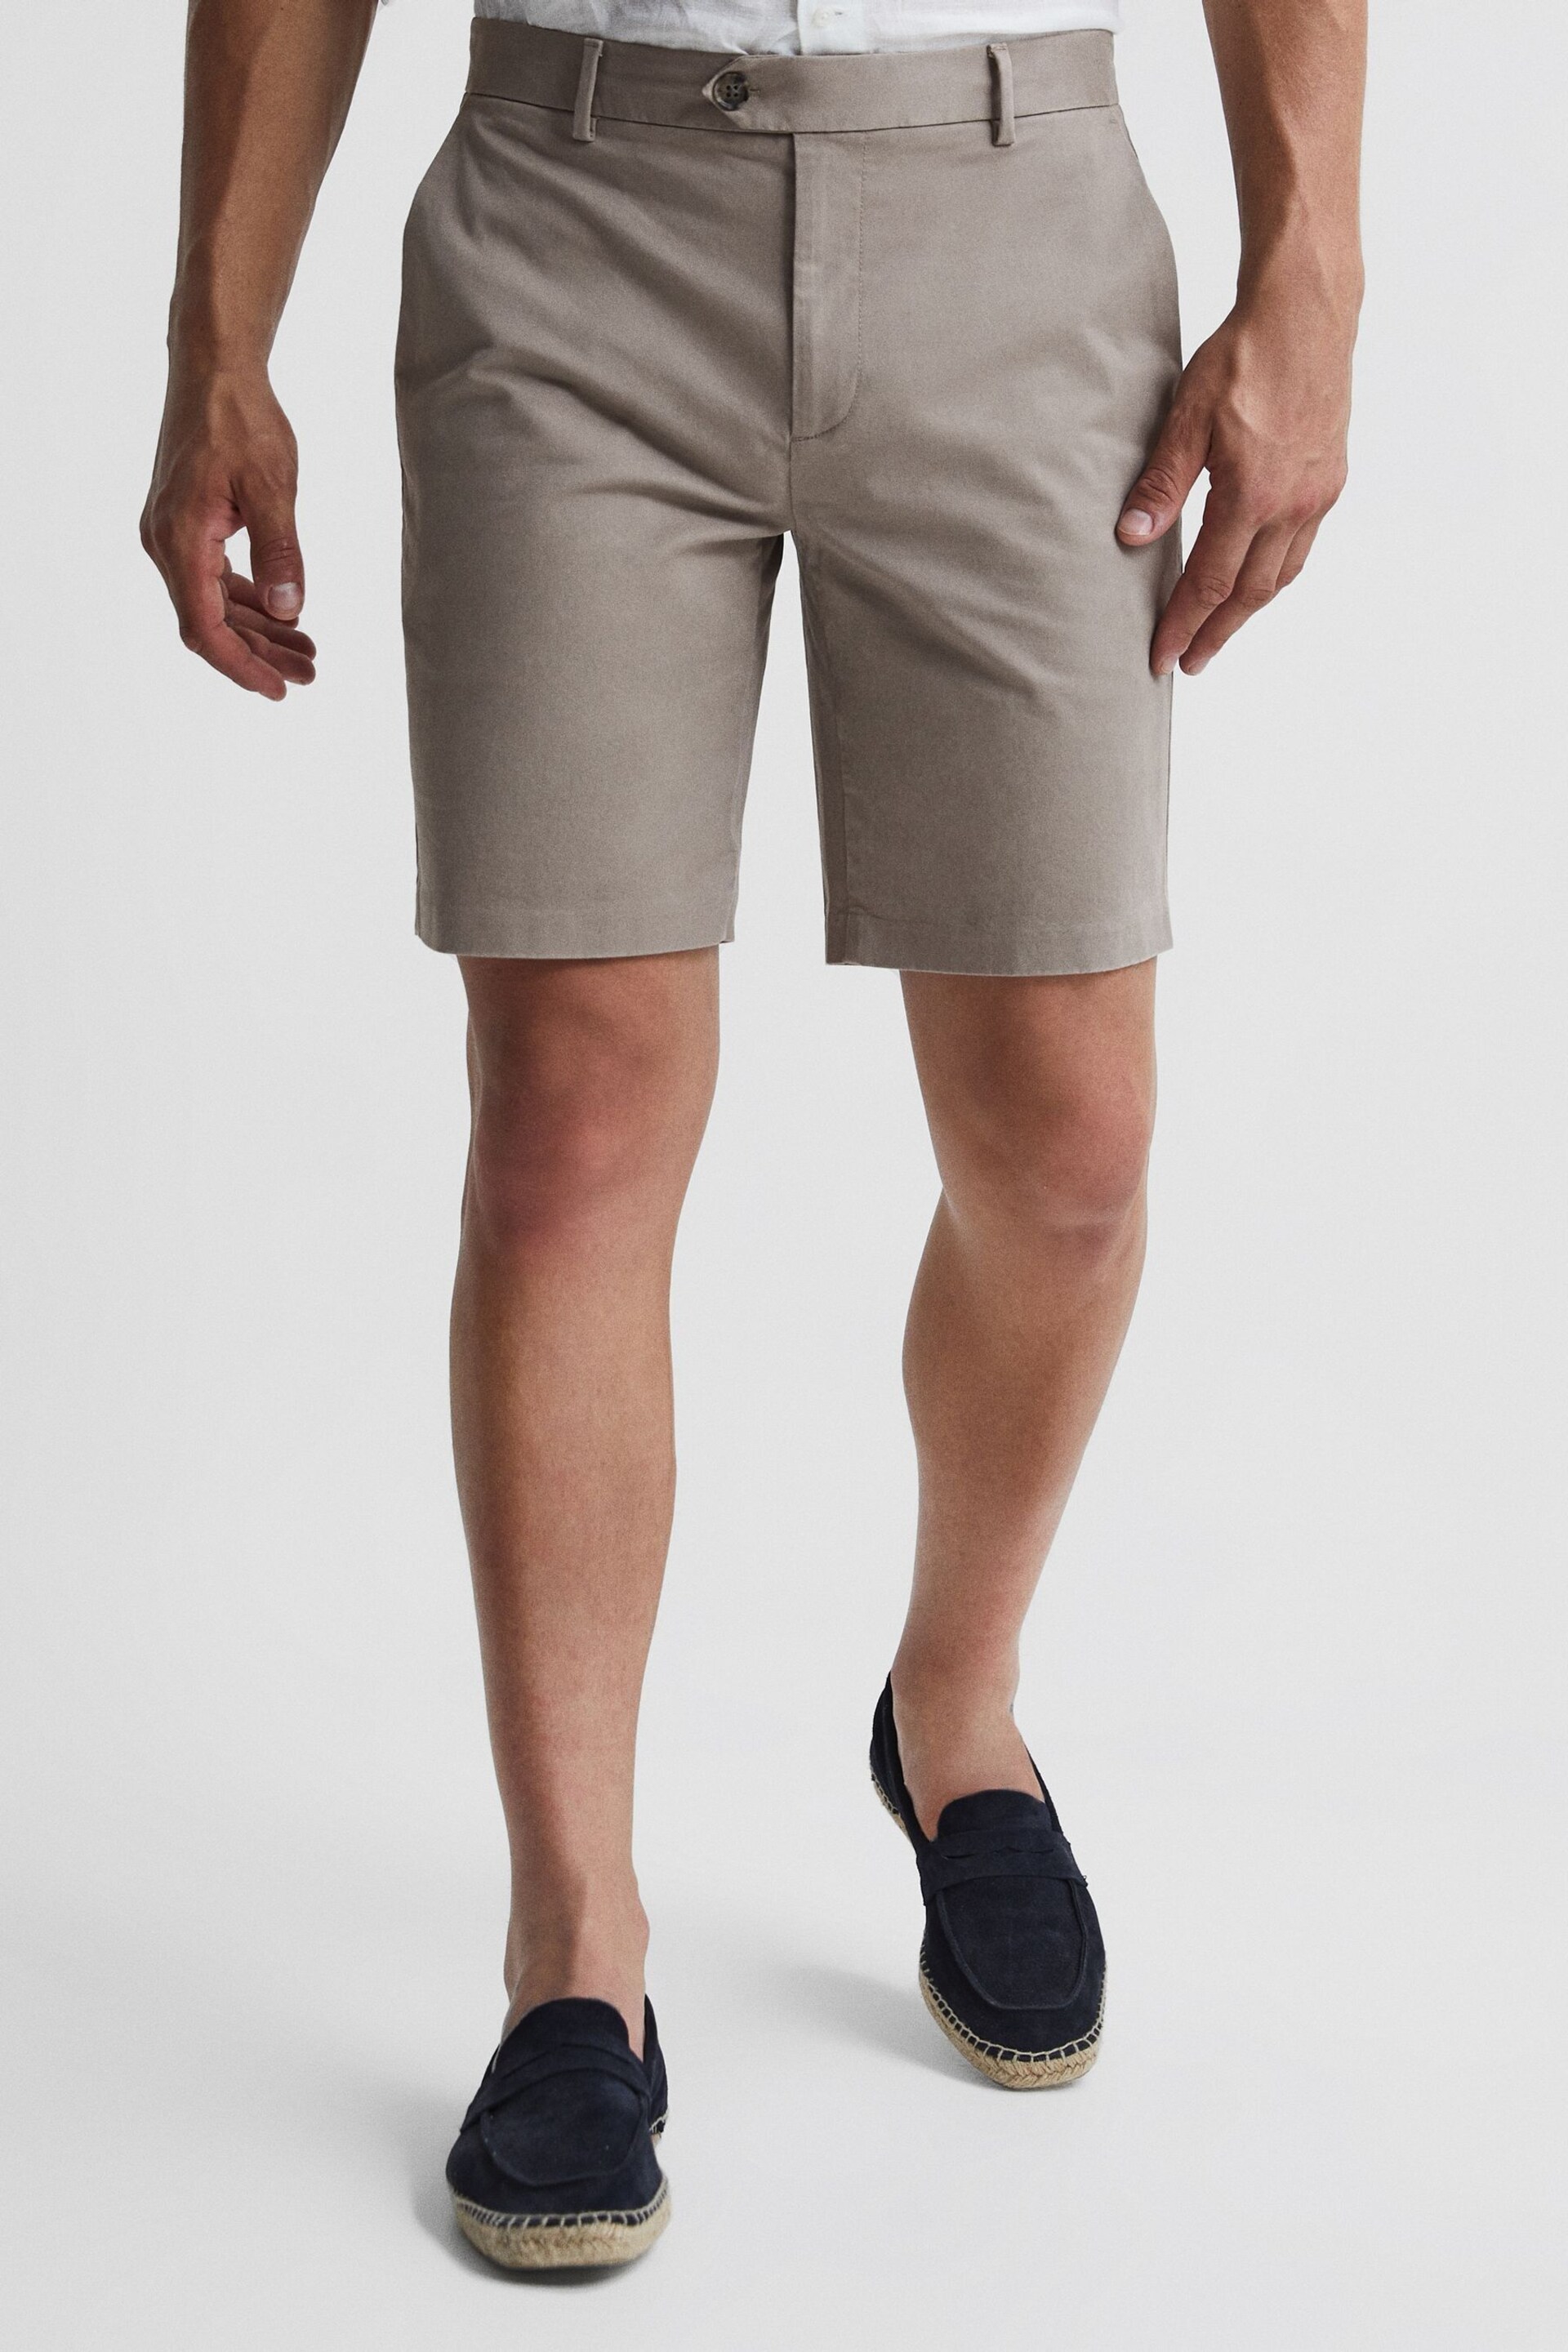 Reiss Mushroom Wicket Modern Fit Cotton Blend Chino Shorts - Image 1 of 7